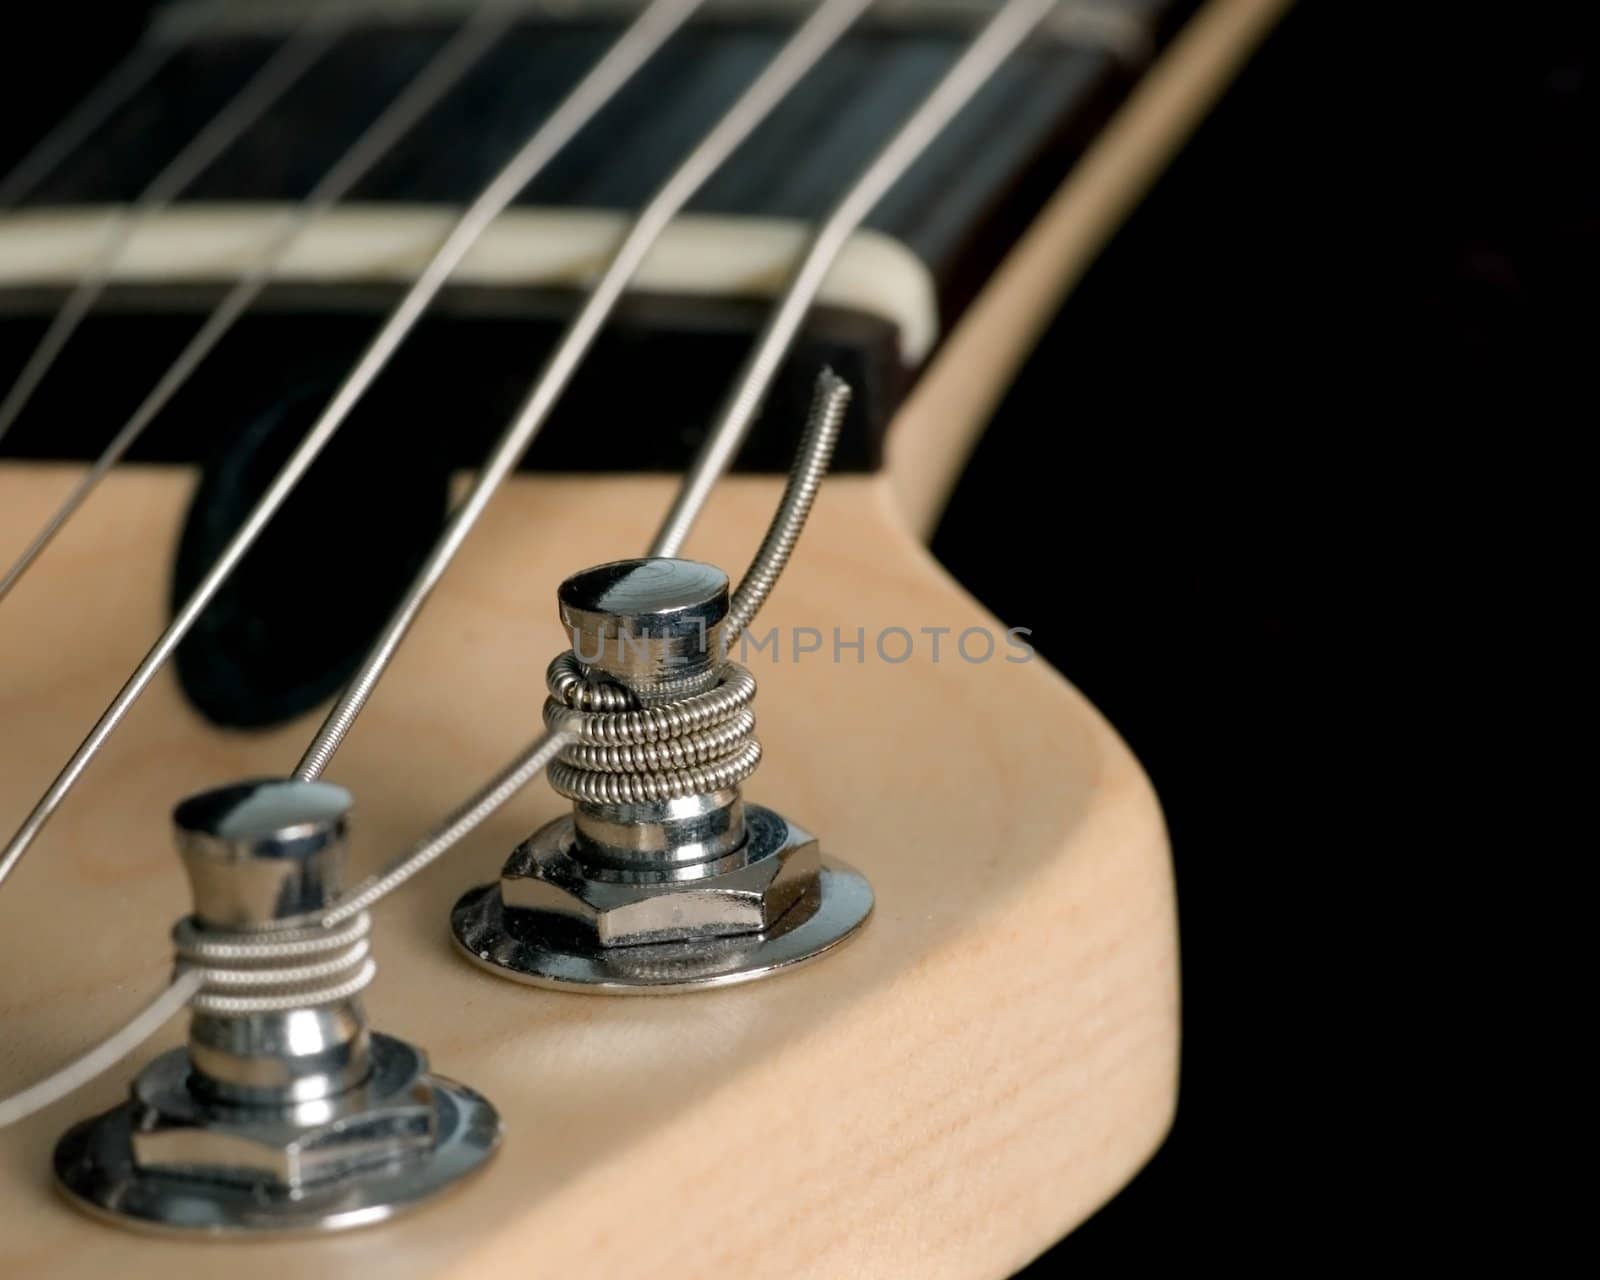 A macro closeup shot of an electric guitar head stock with string tuning pegs